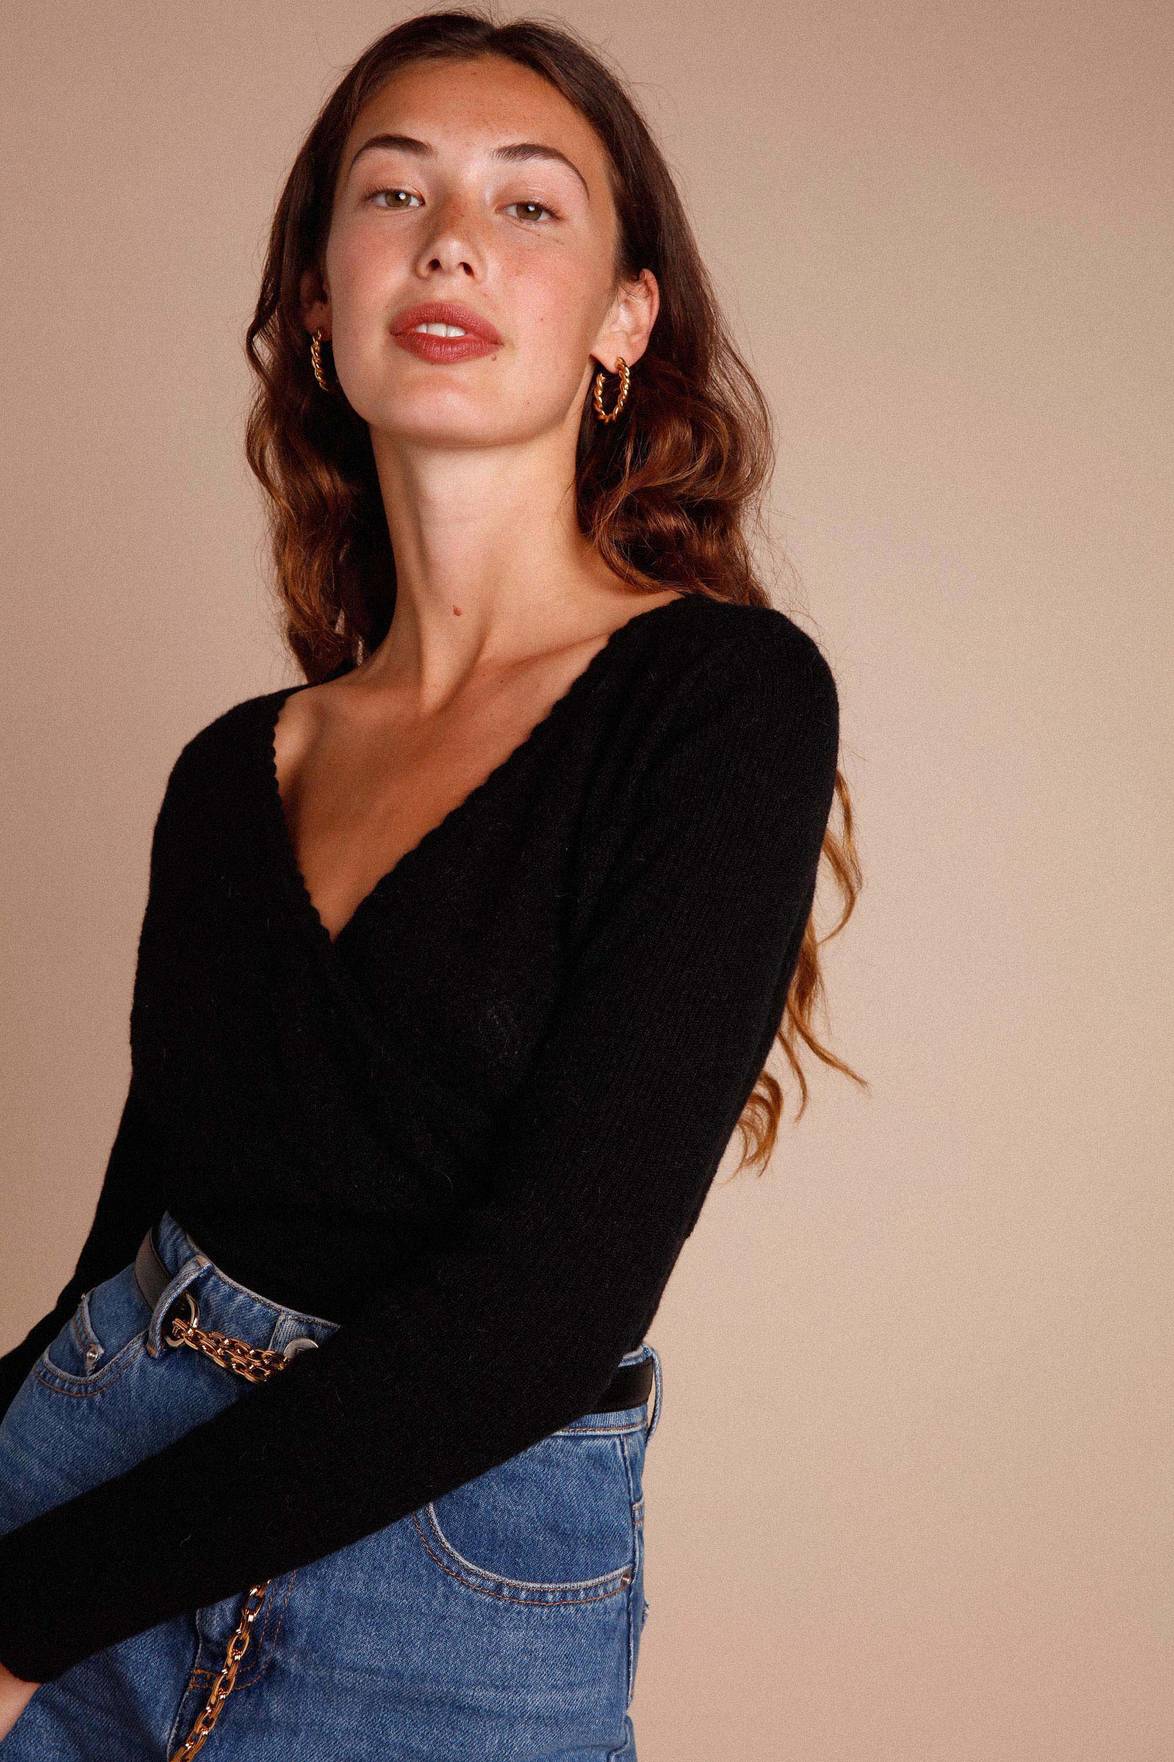 Elevate your style with the Jersey Zoeline! Crafted with a textured punto negro fabric, this top features a flattering "V" neckline, unique crossover design, and comfortable long sleeves. Experience the perfect combination of sophistication and comfort in one garment.